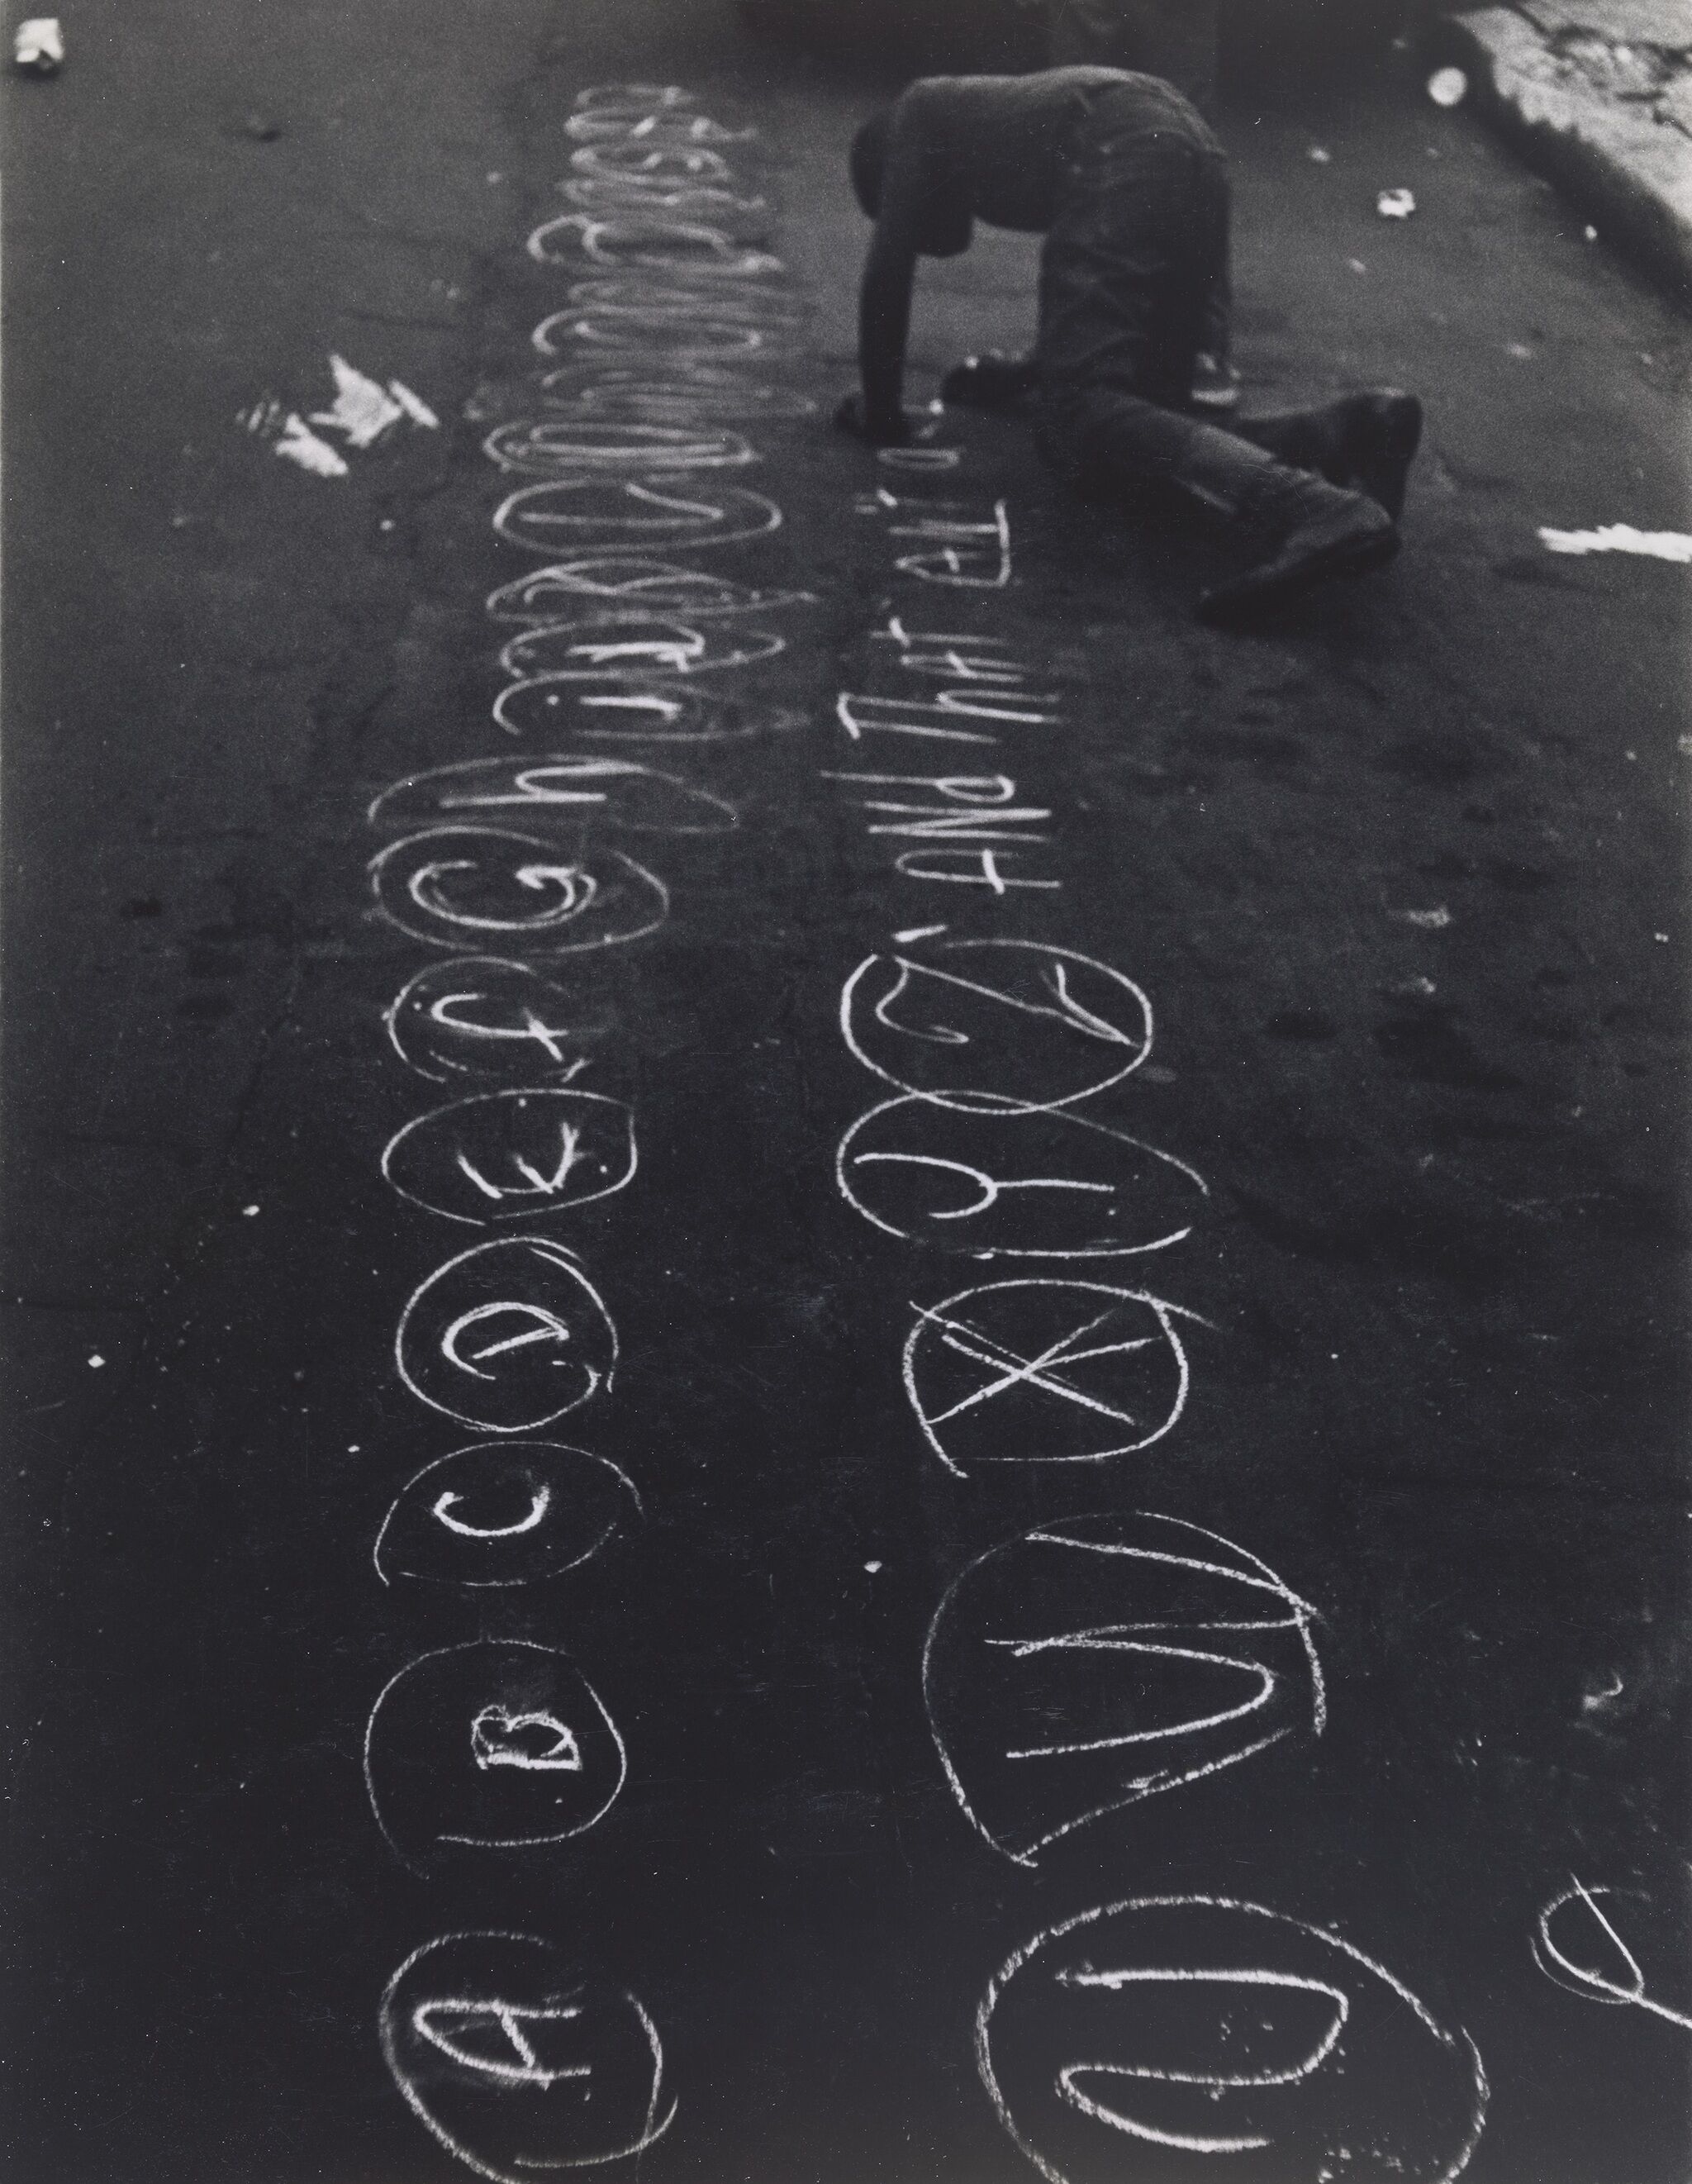 Letters of the alphabet handwritten on pavement with a person crouched and writing on the ground.